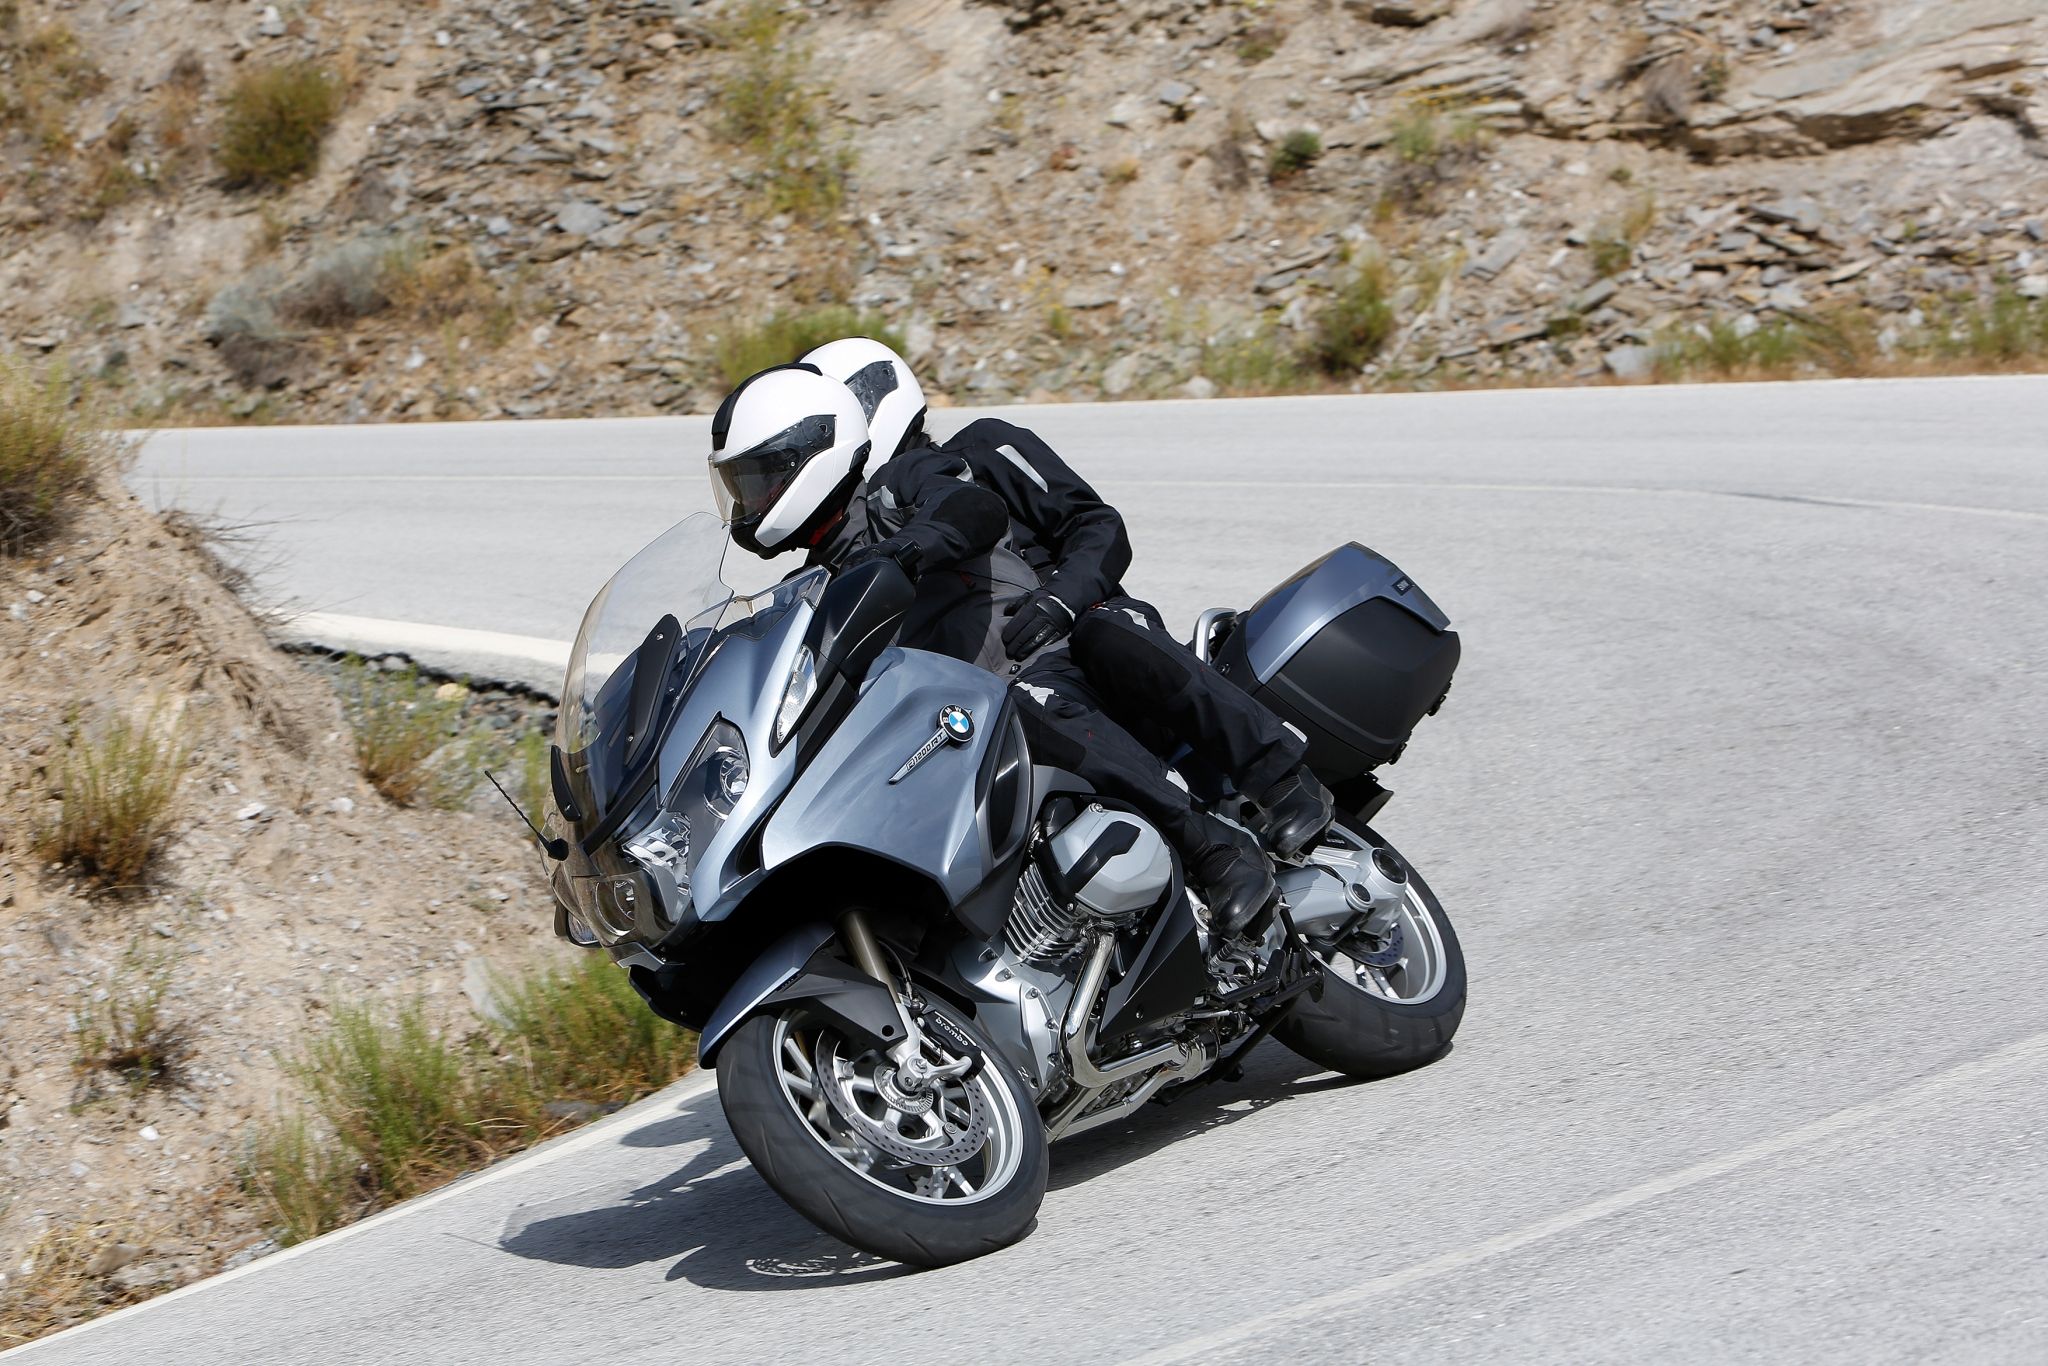 BMW Sells Record Motorcycles Globally in 2014